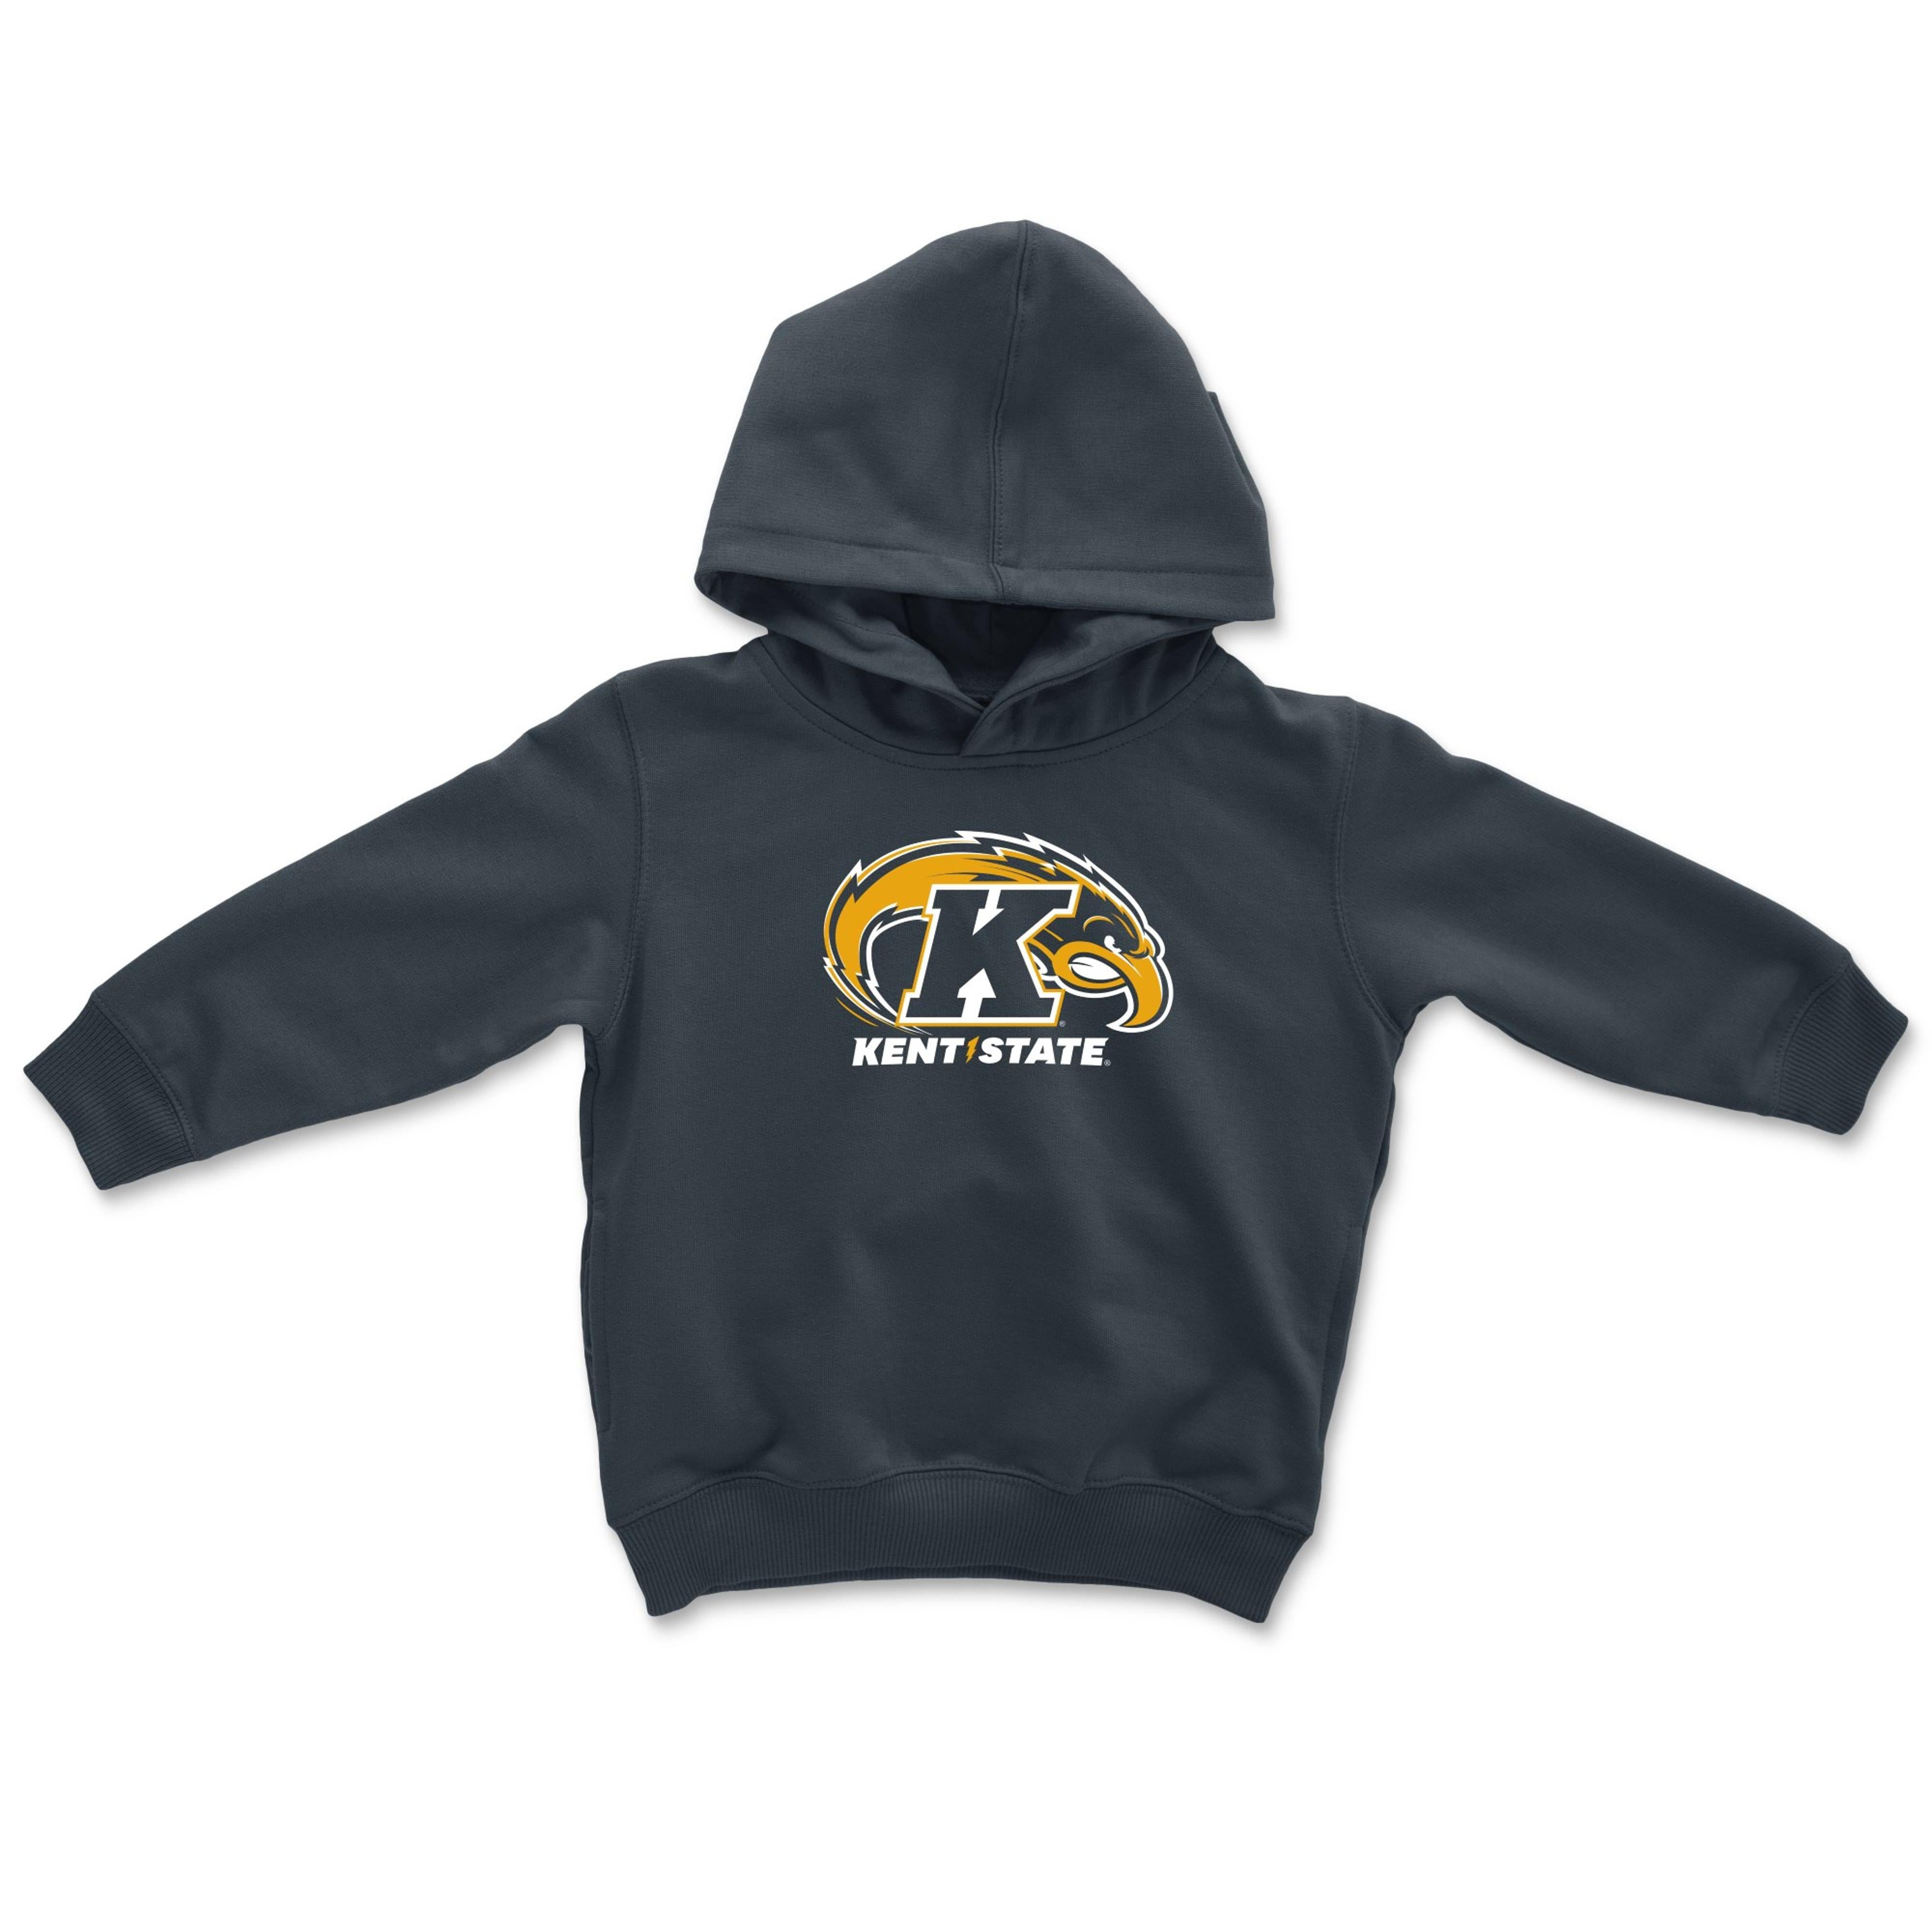 Kent State Navy Youth Hoodie